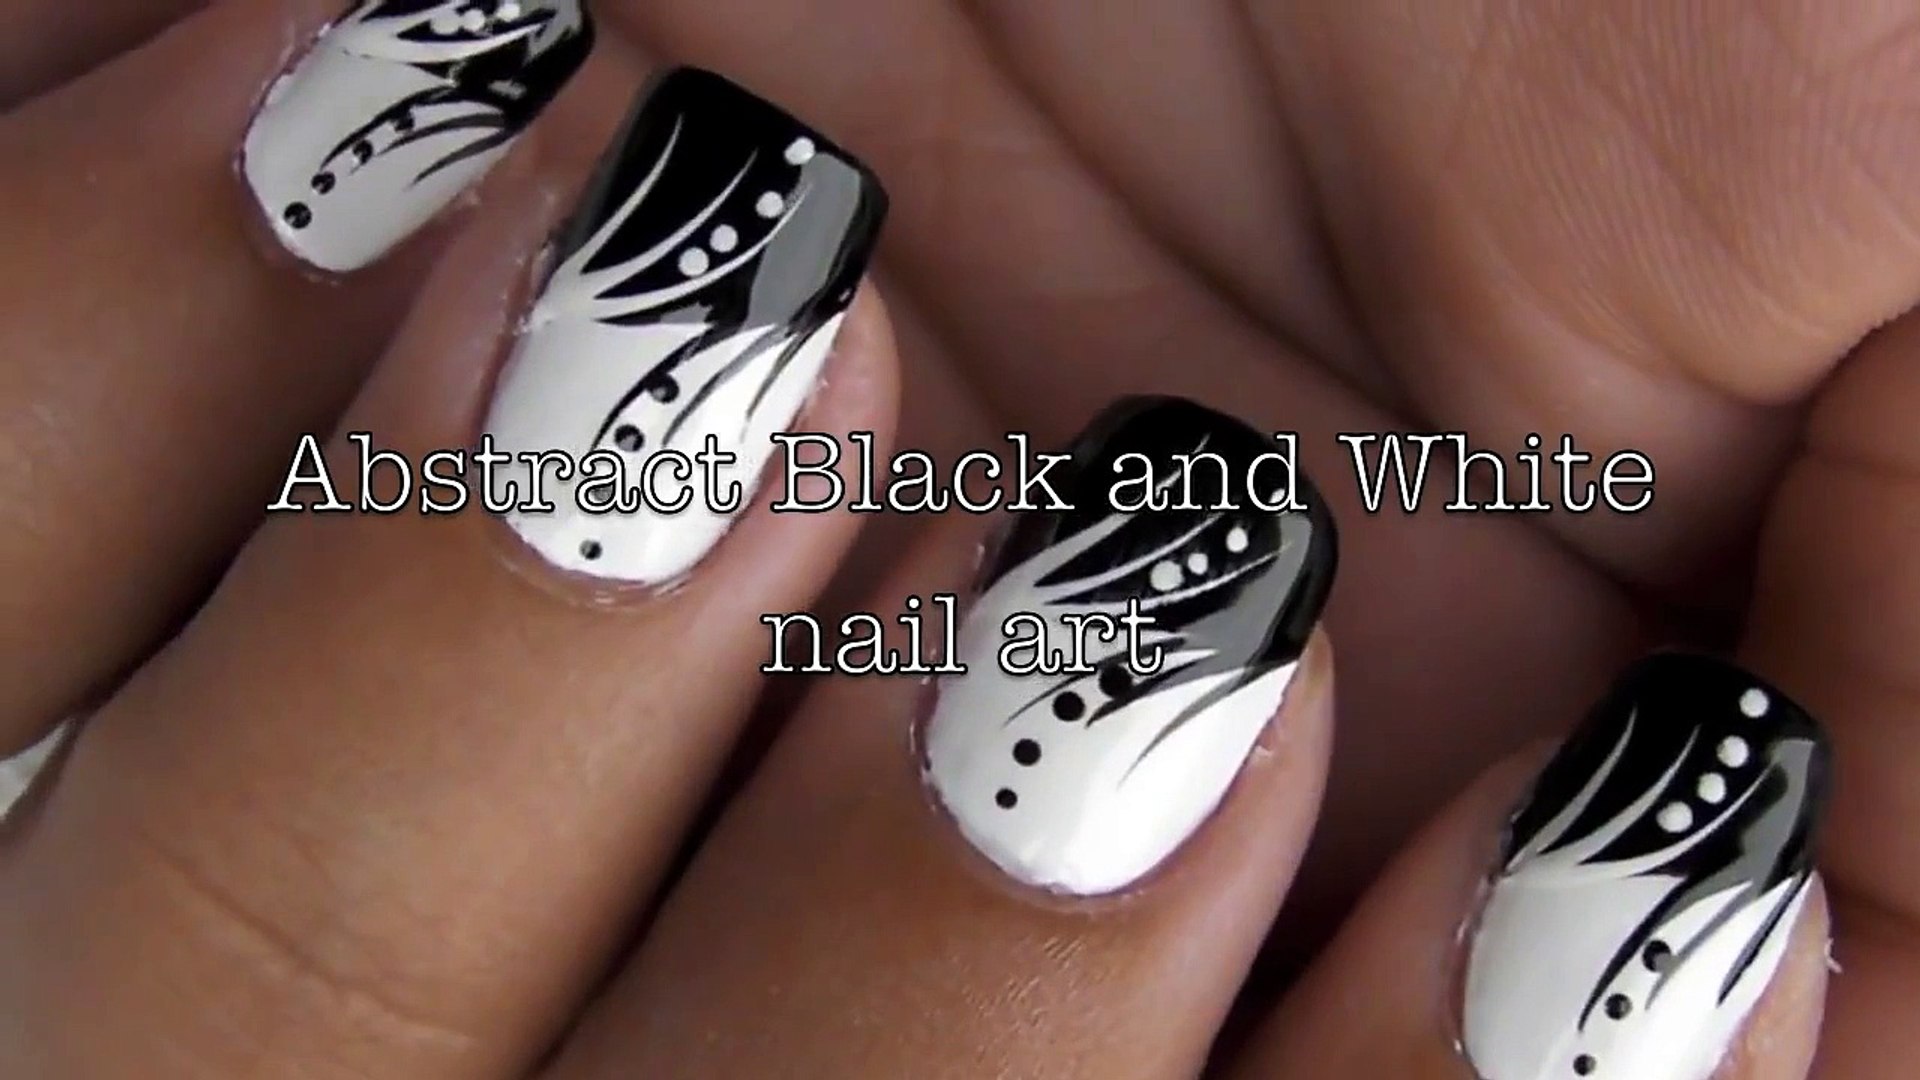 5. Classic Black and White Nail Art Tutorial - wide 8